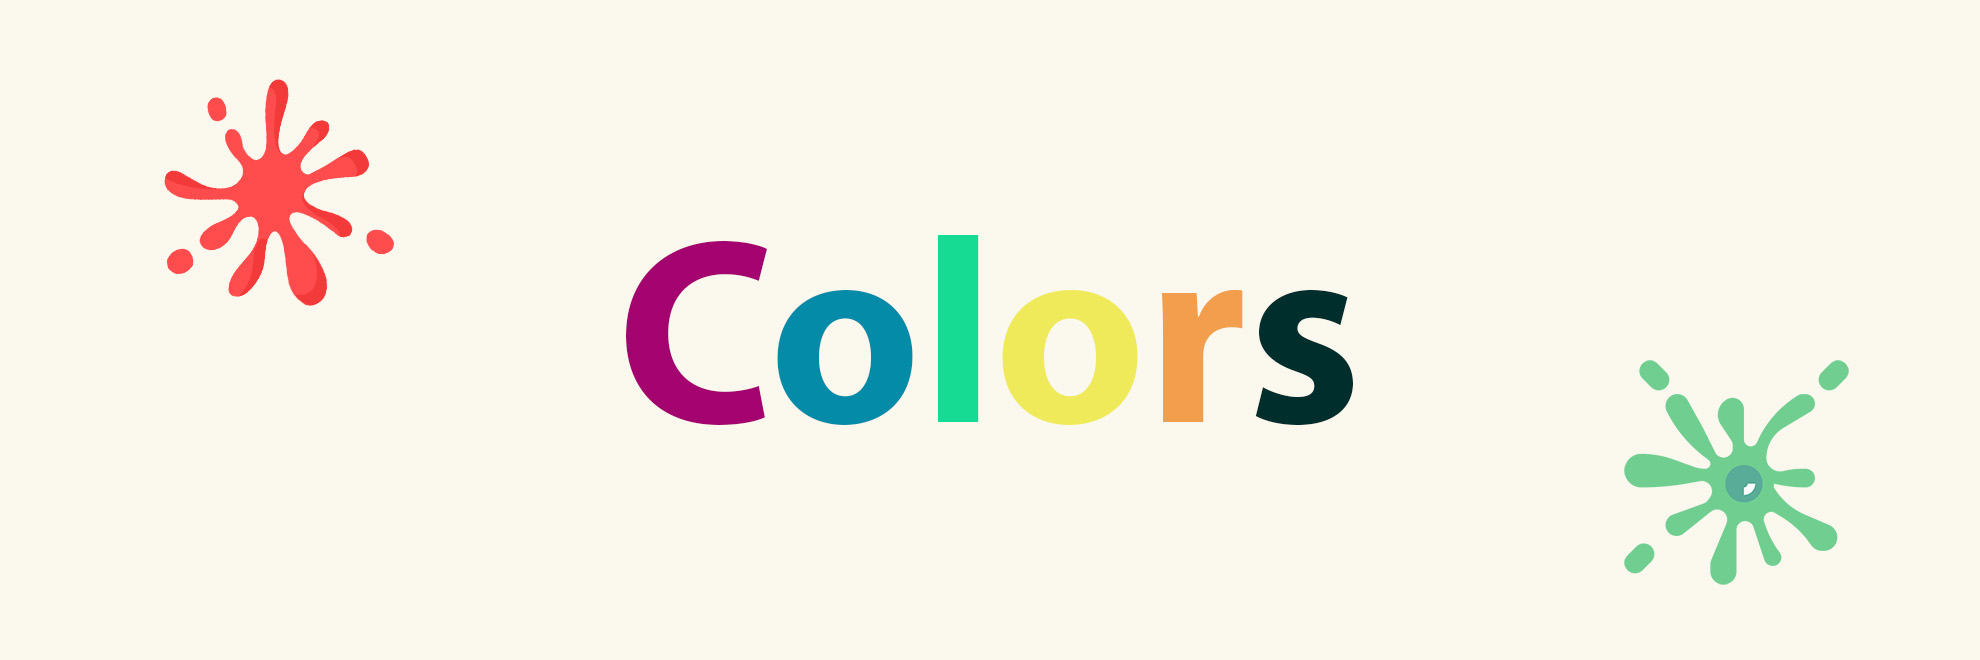 Illustration showing colors caption, each letter is in a different, vibrant color. In the corners there are colorful paint splashes.